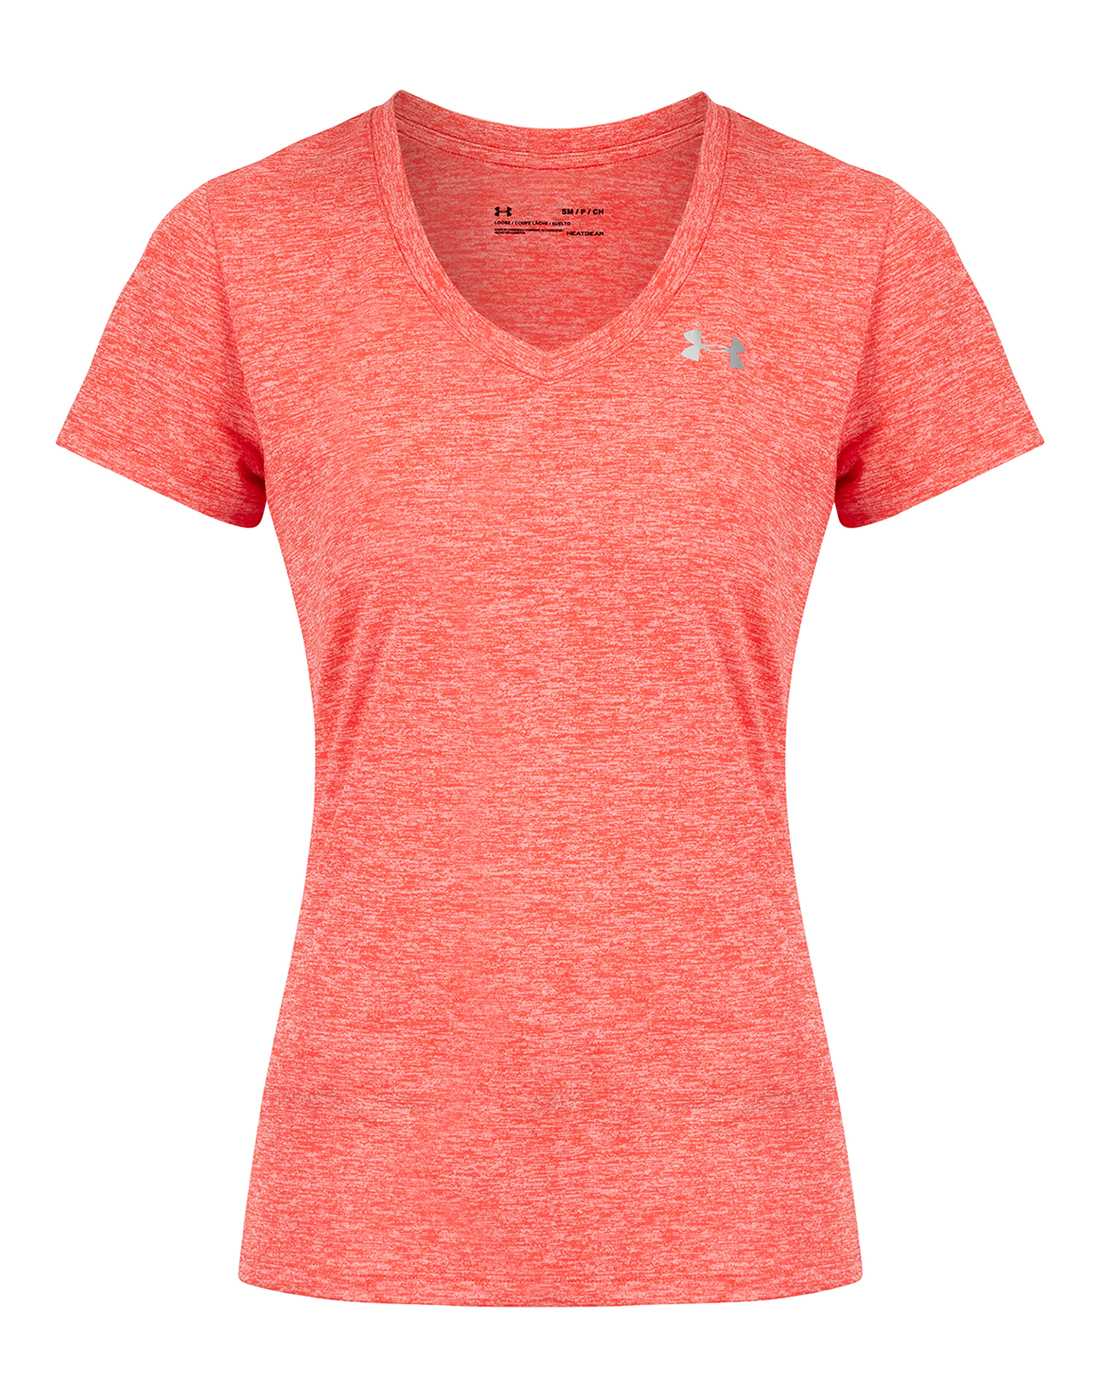 Under Armour Womens Tech T-shirt - Red | Life Style Sports IE